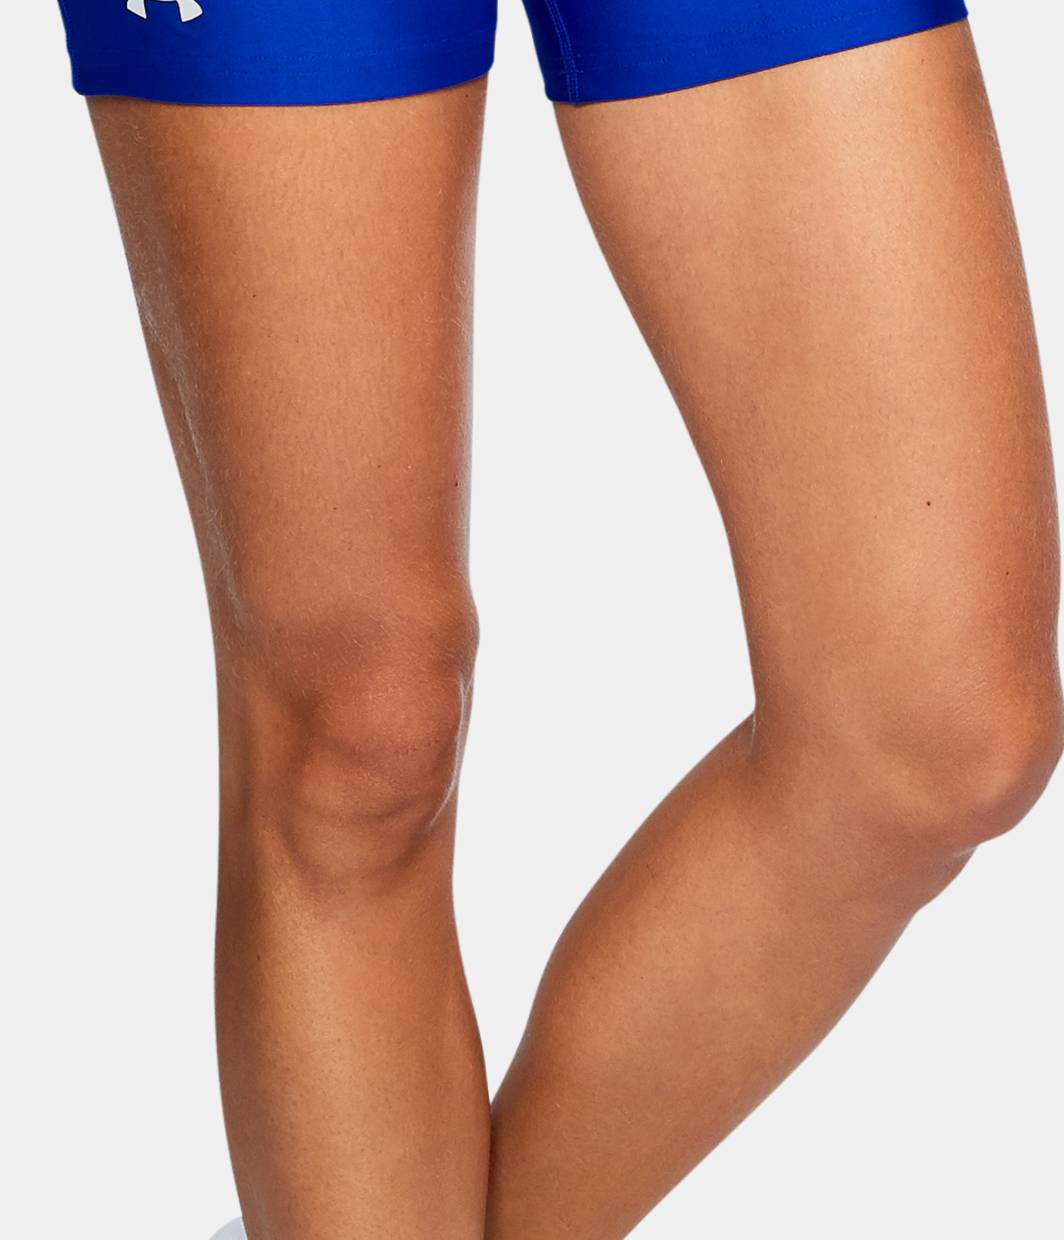 Under Armour Womens Spandex Volleyball Shorts: 1300160